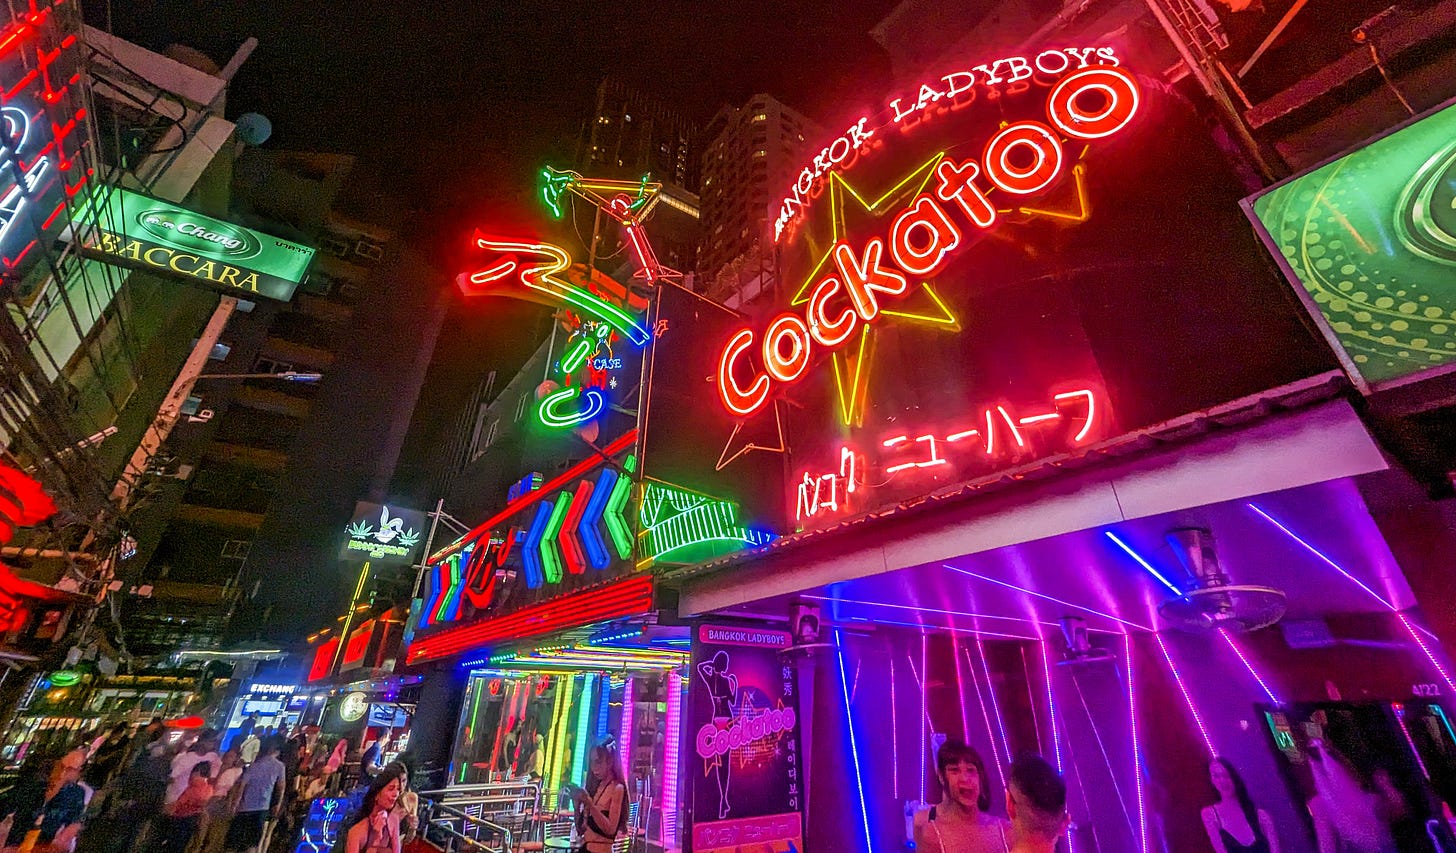 Another photo of Soi Cowboy, the Cockatoo Bar lit up with bright neon. 